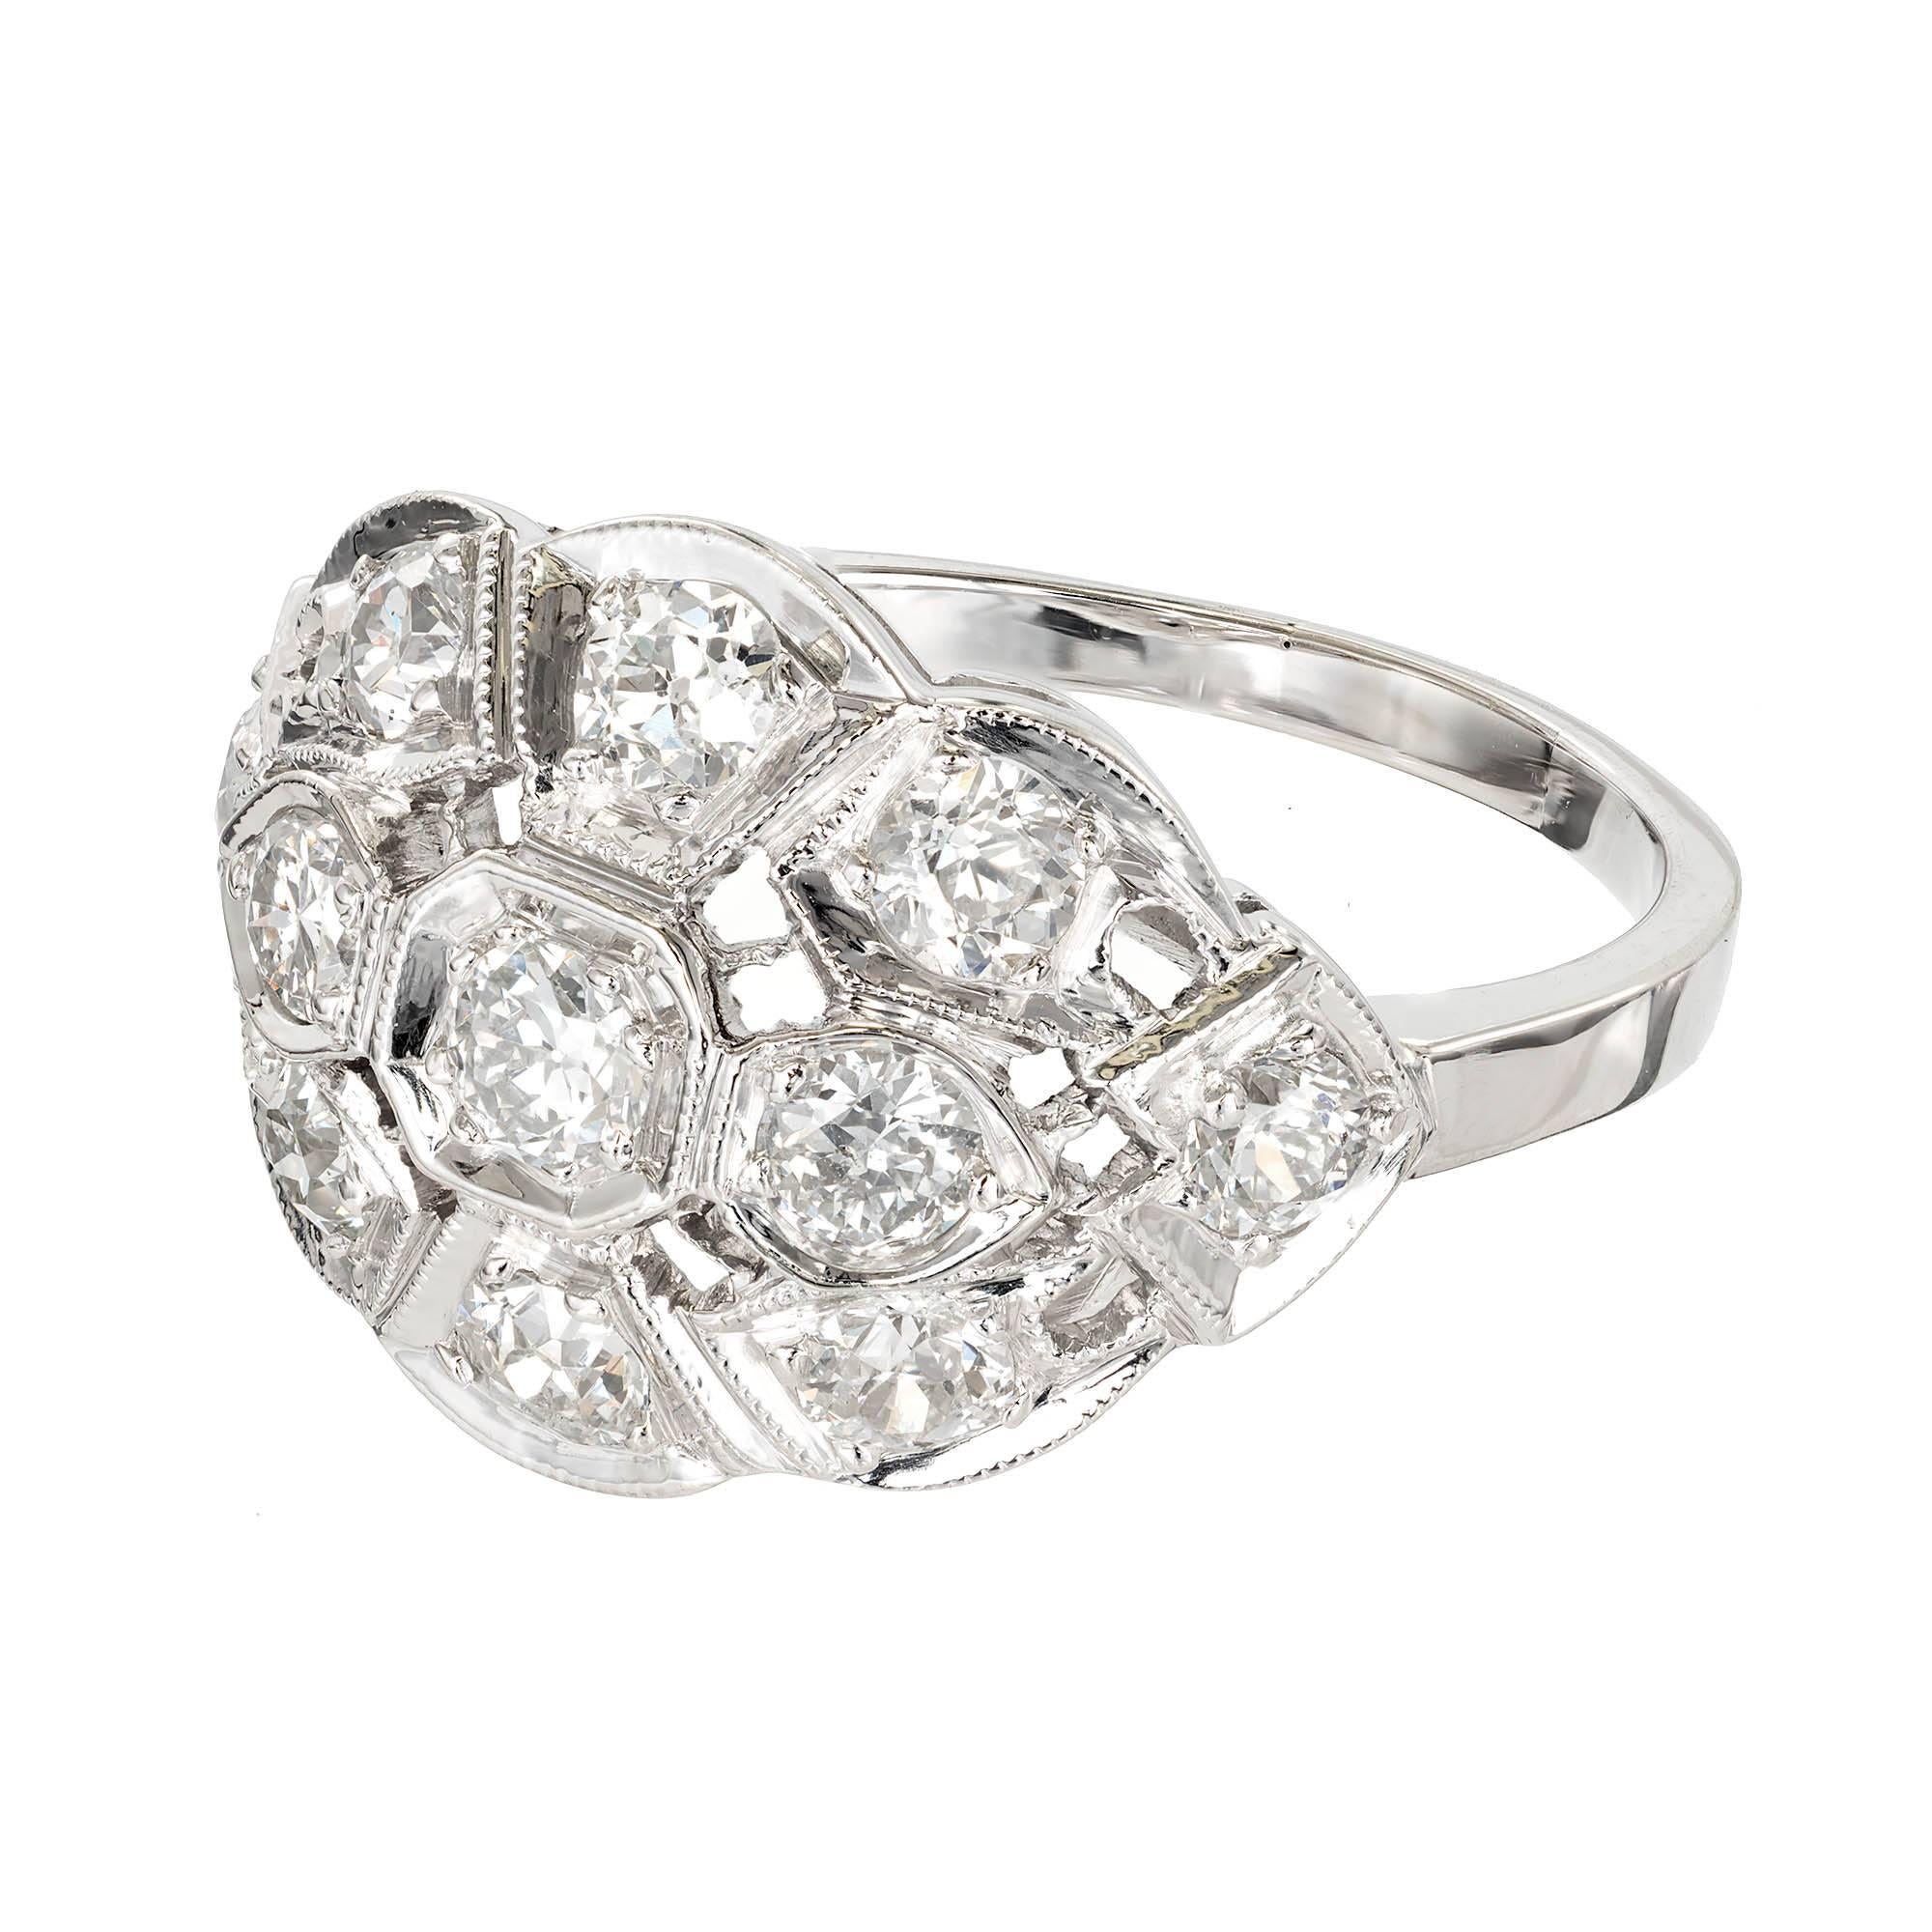 Vintage Art Deco 1930s old European and transitional cut Diamond pierced dome cocktail ring, in 14k white gold.

11 old European cut Diamonds, approx. total weight 1.10cts, G – H, VS – SI
Size 5.75 and sizable
14k white gold
Tested and stamped: